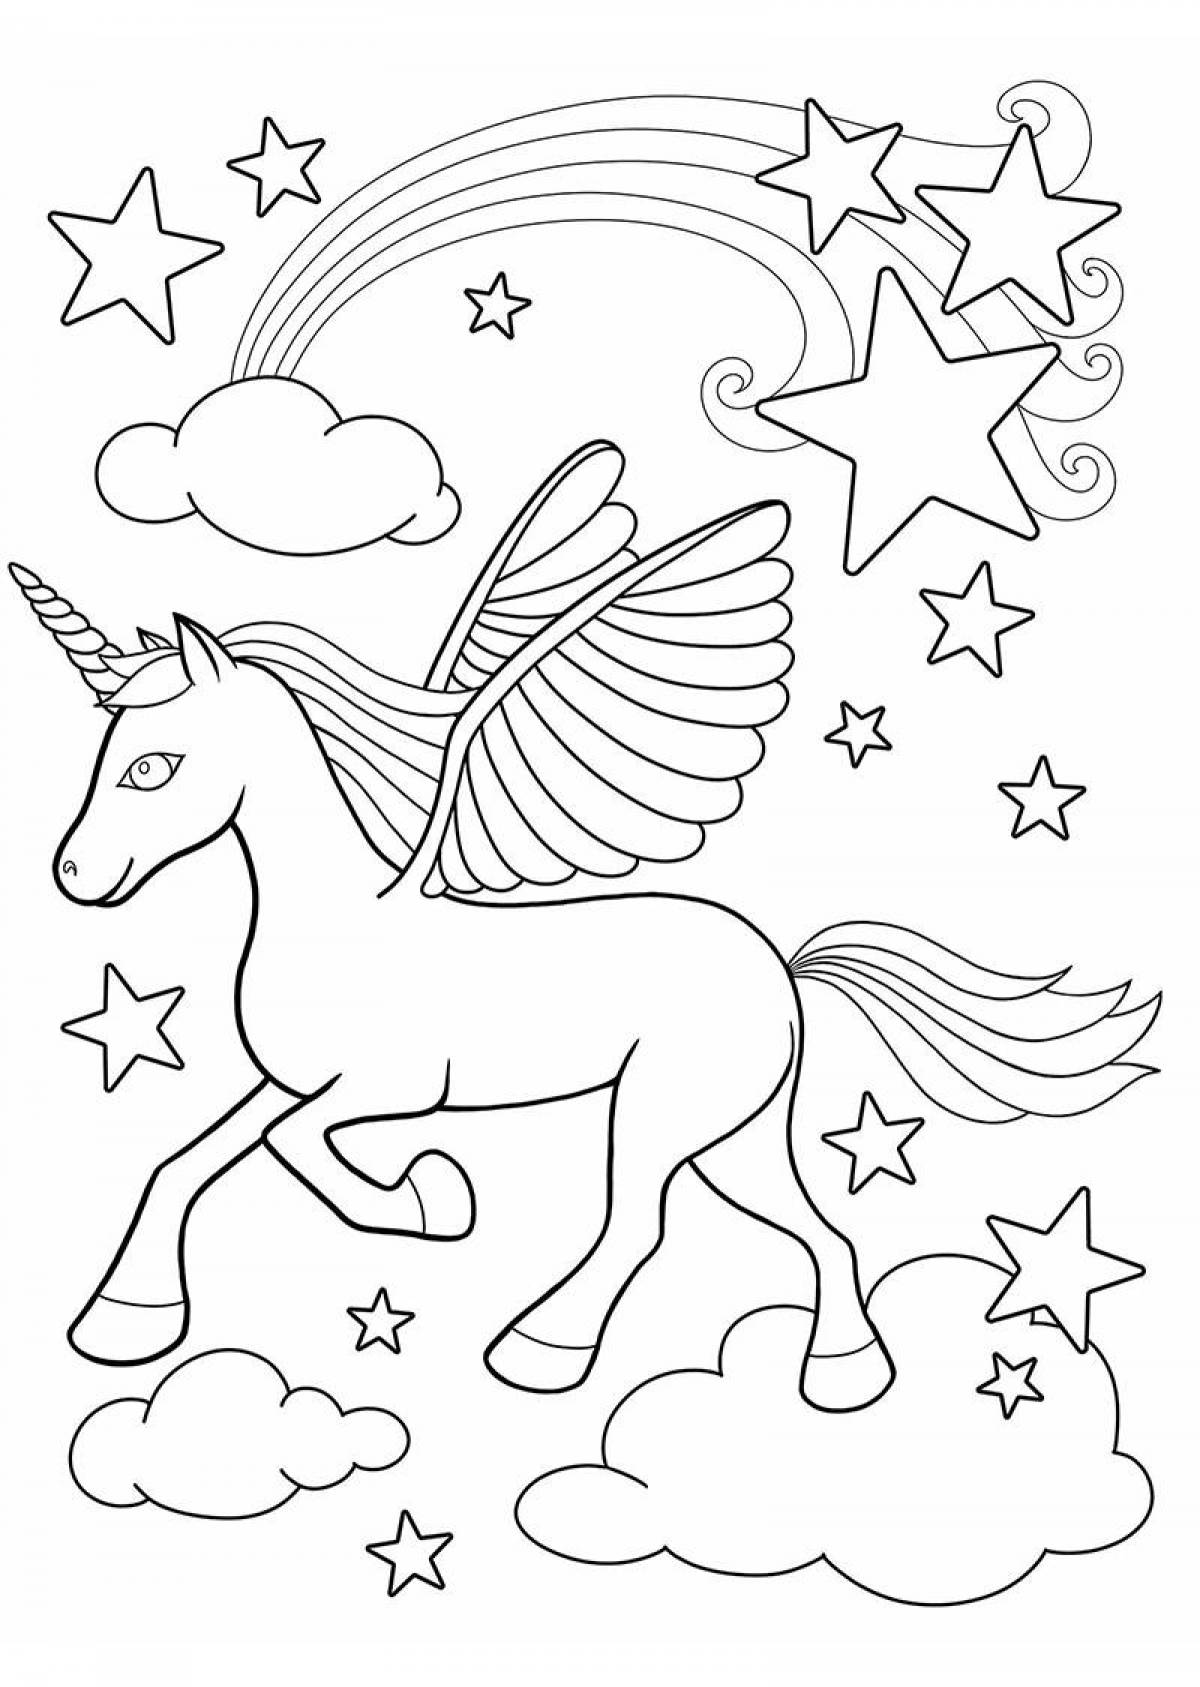 Animated unicorn coloring book for kids